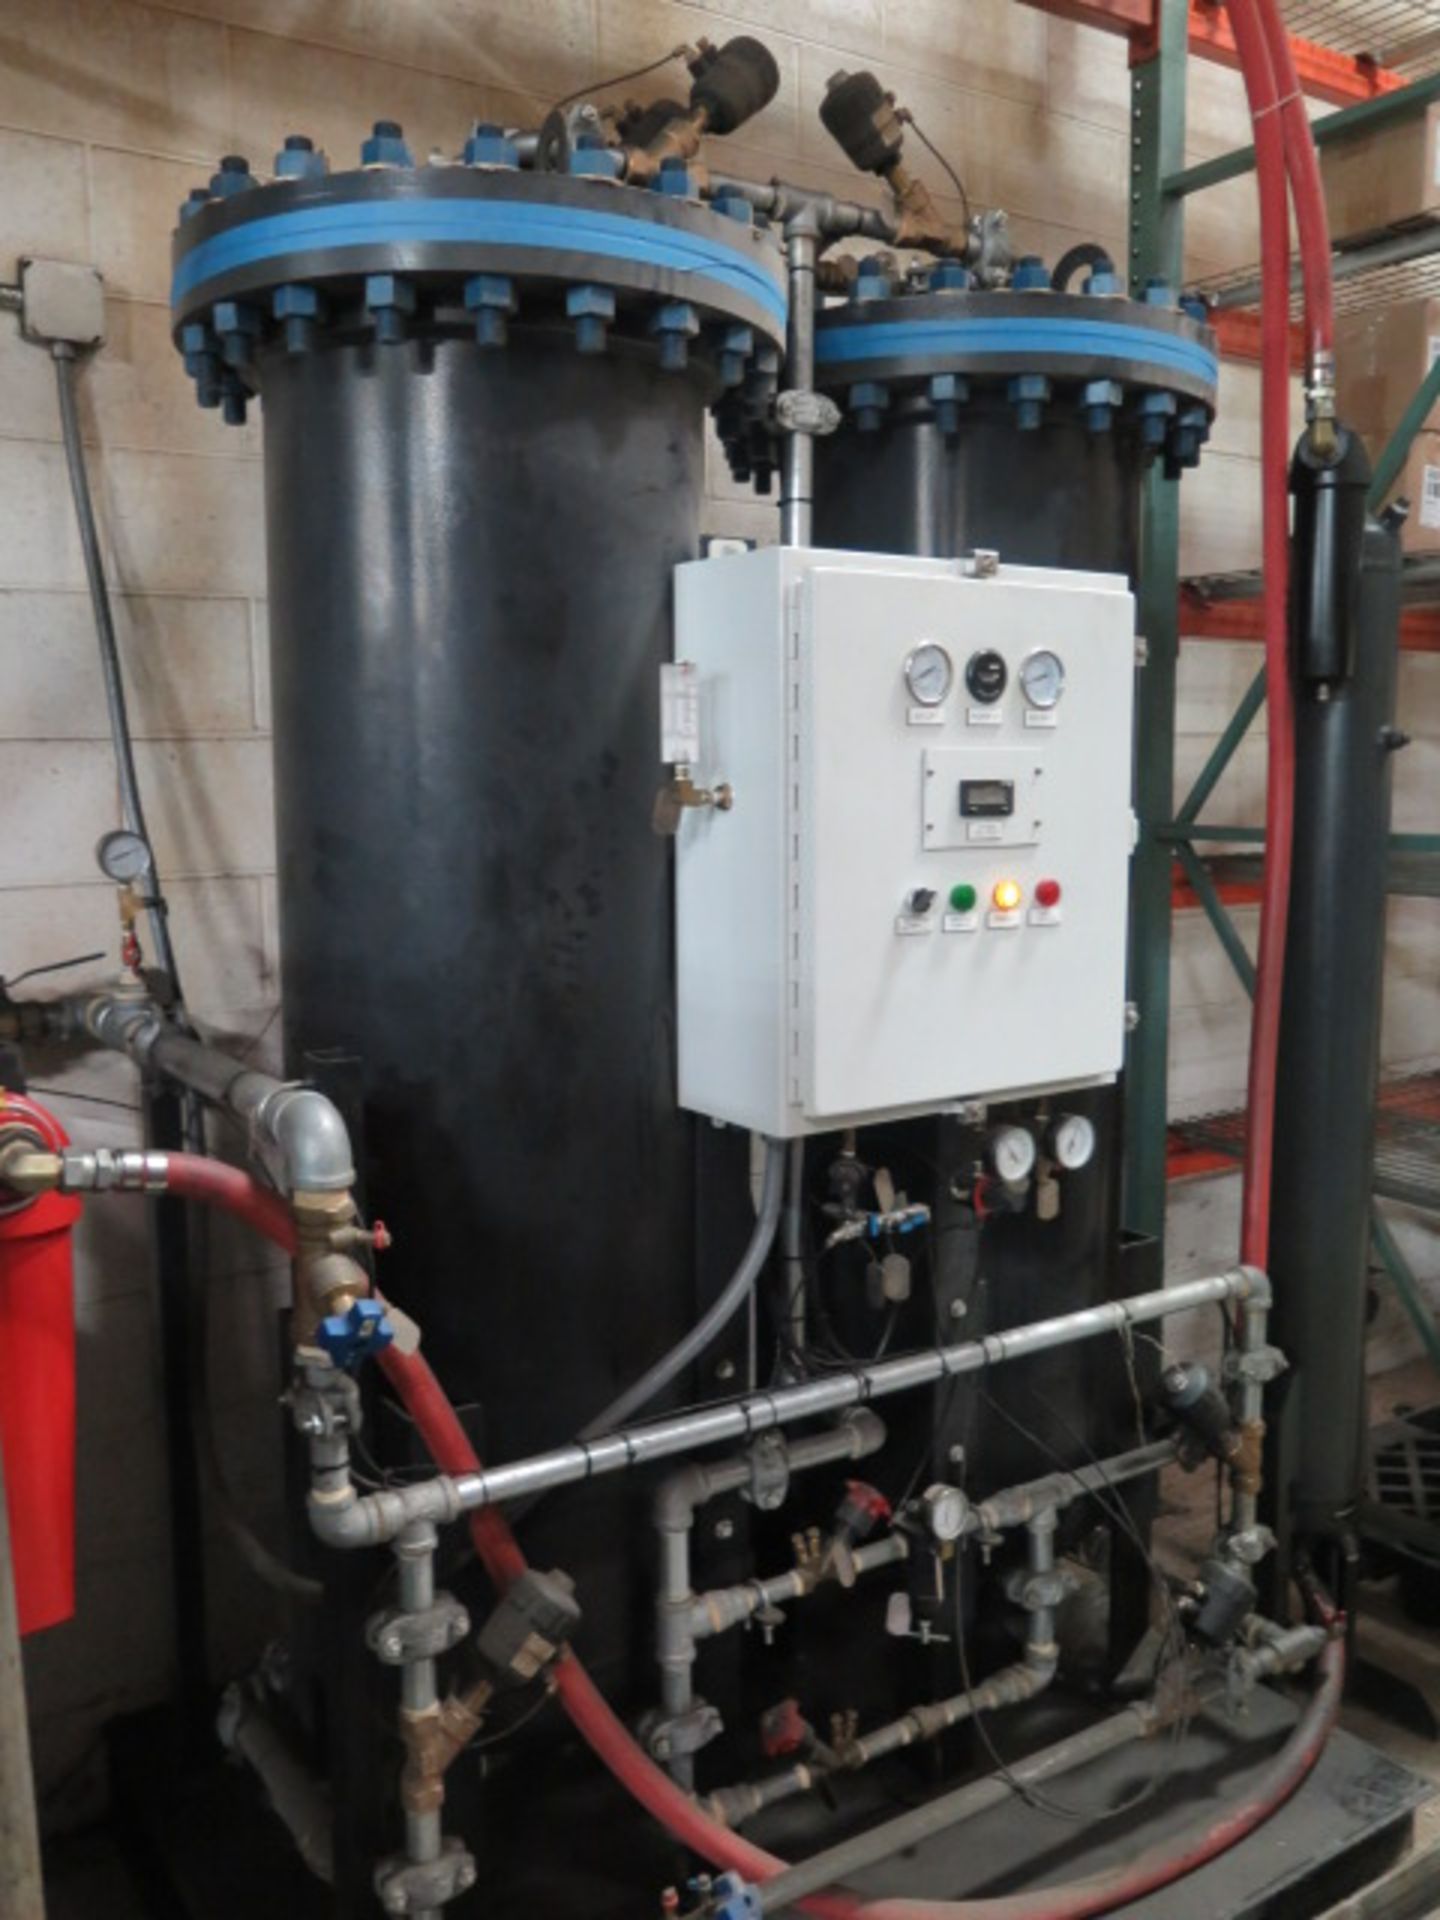 2008 Kaeser SFC227 Nitrogen Generation System w/ Kaeser Rotary Compressor, Booster Comp, SOLD AS IS - Image 8 of 15